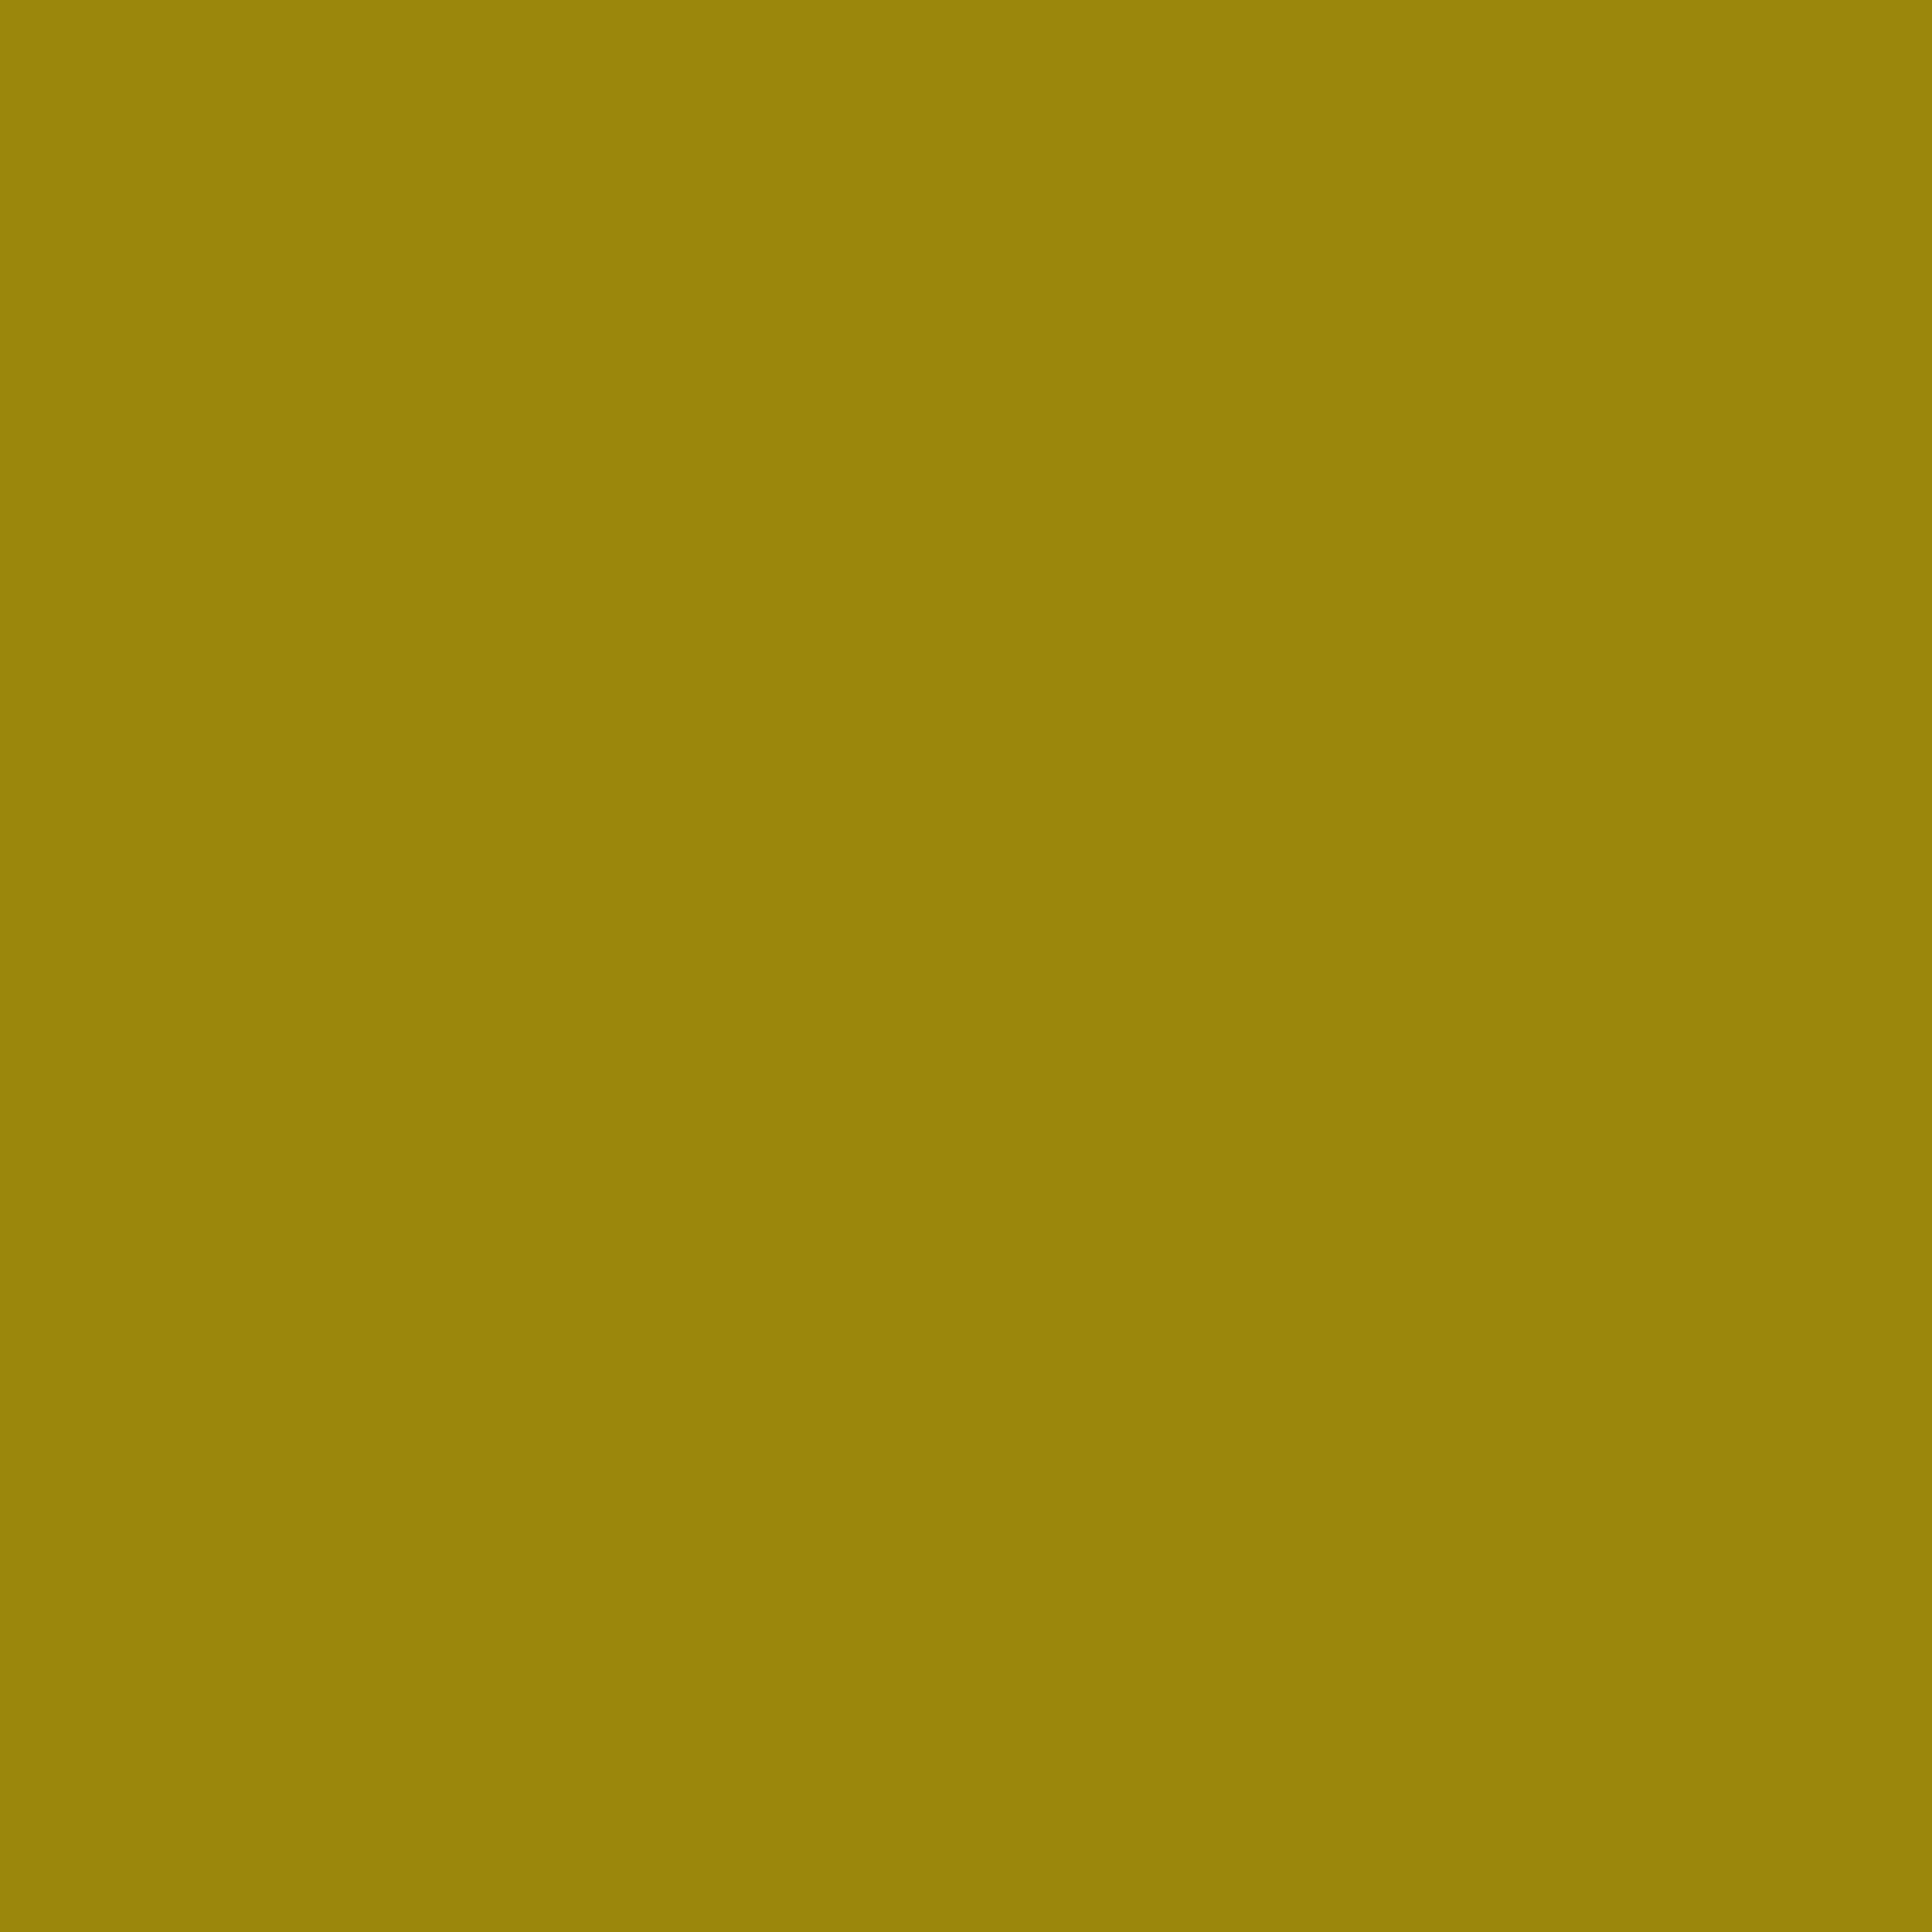 2732x2732 Dark Yellow Solid Color Background